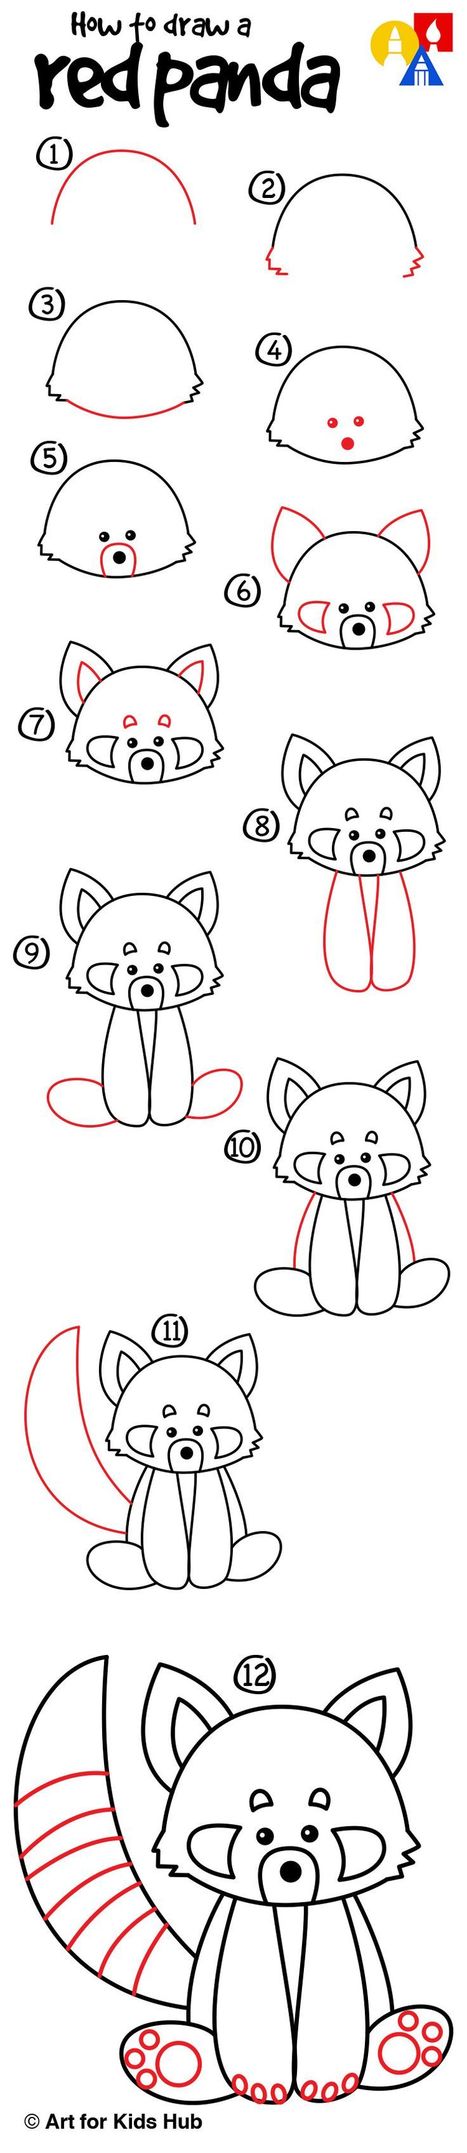 How To Draw A Red Panda | Drawing and Painting Tutorials | Scoop.it